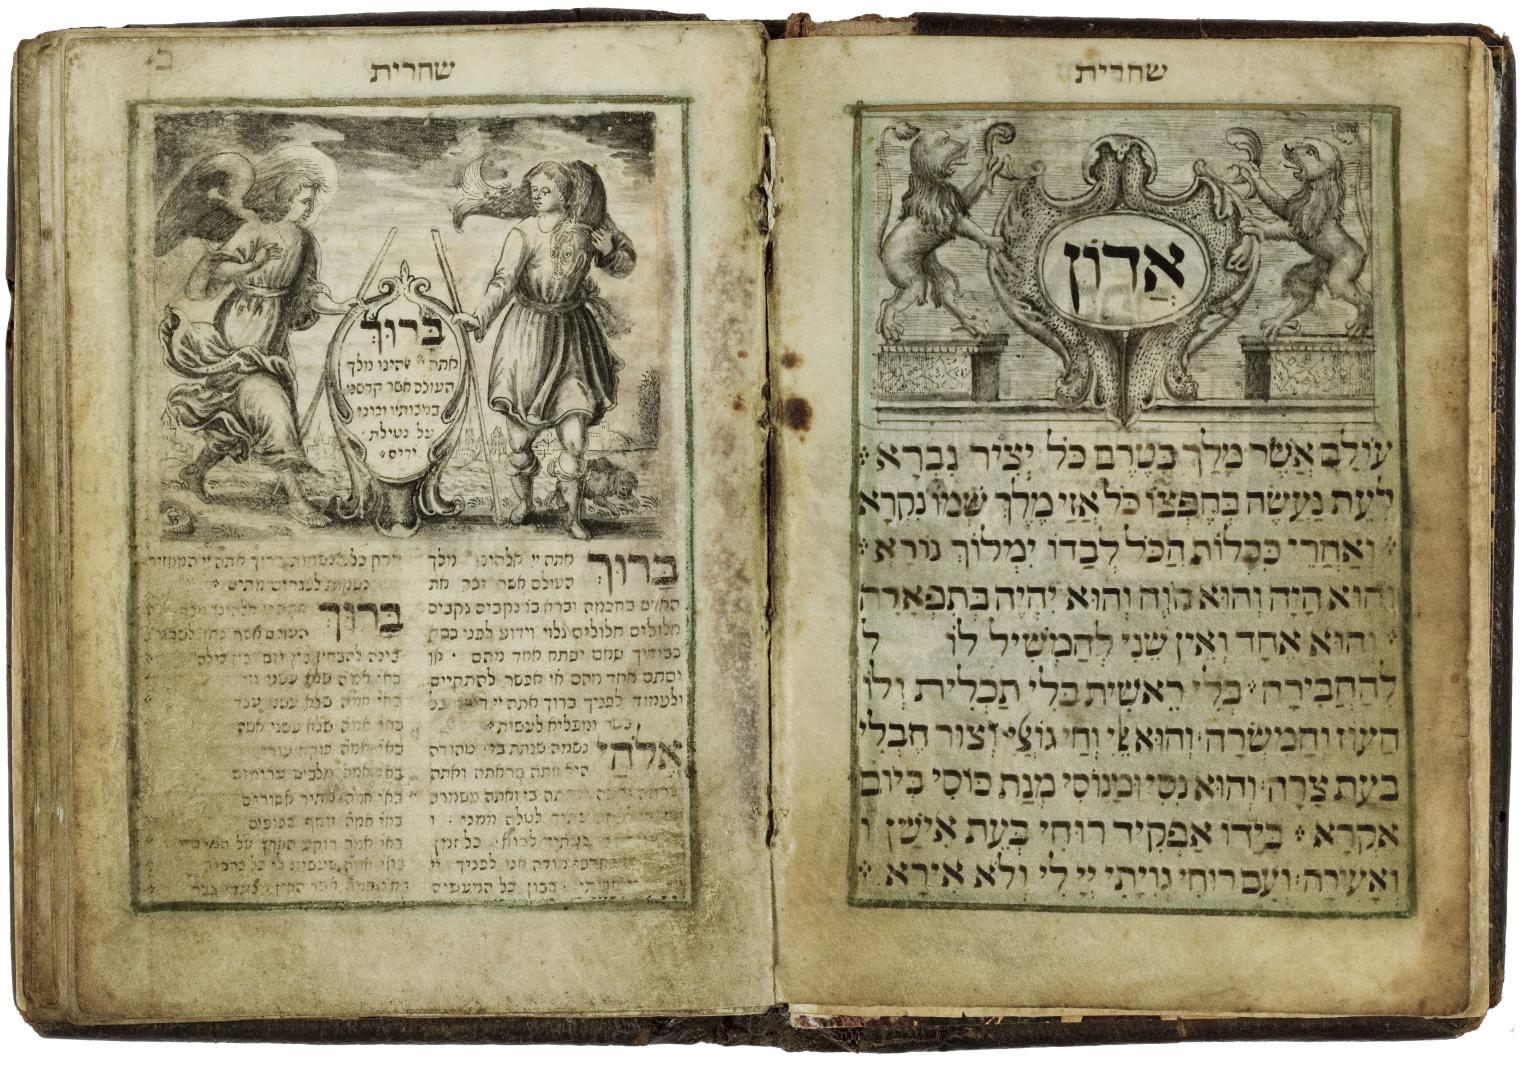 Facing-page book with Hebrew writing and images of figures on left side and lions on right side.